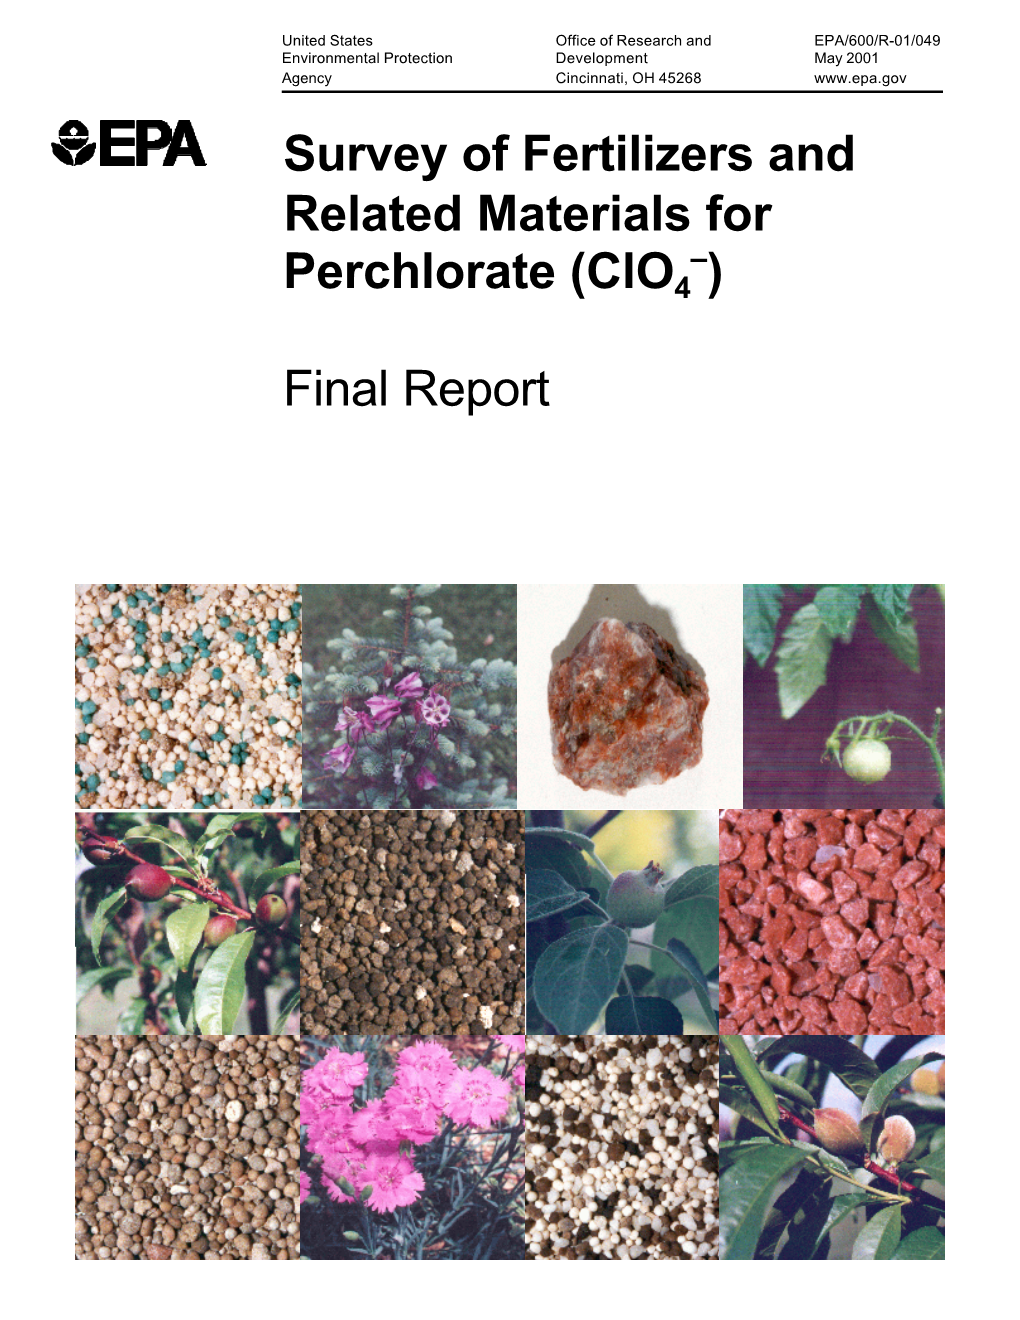 Survey of Fertilizers and Related Materials for Perchlorate (Clo4 )